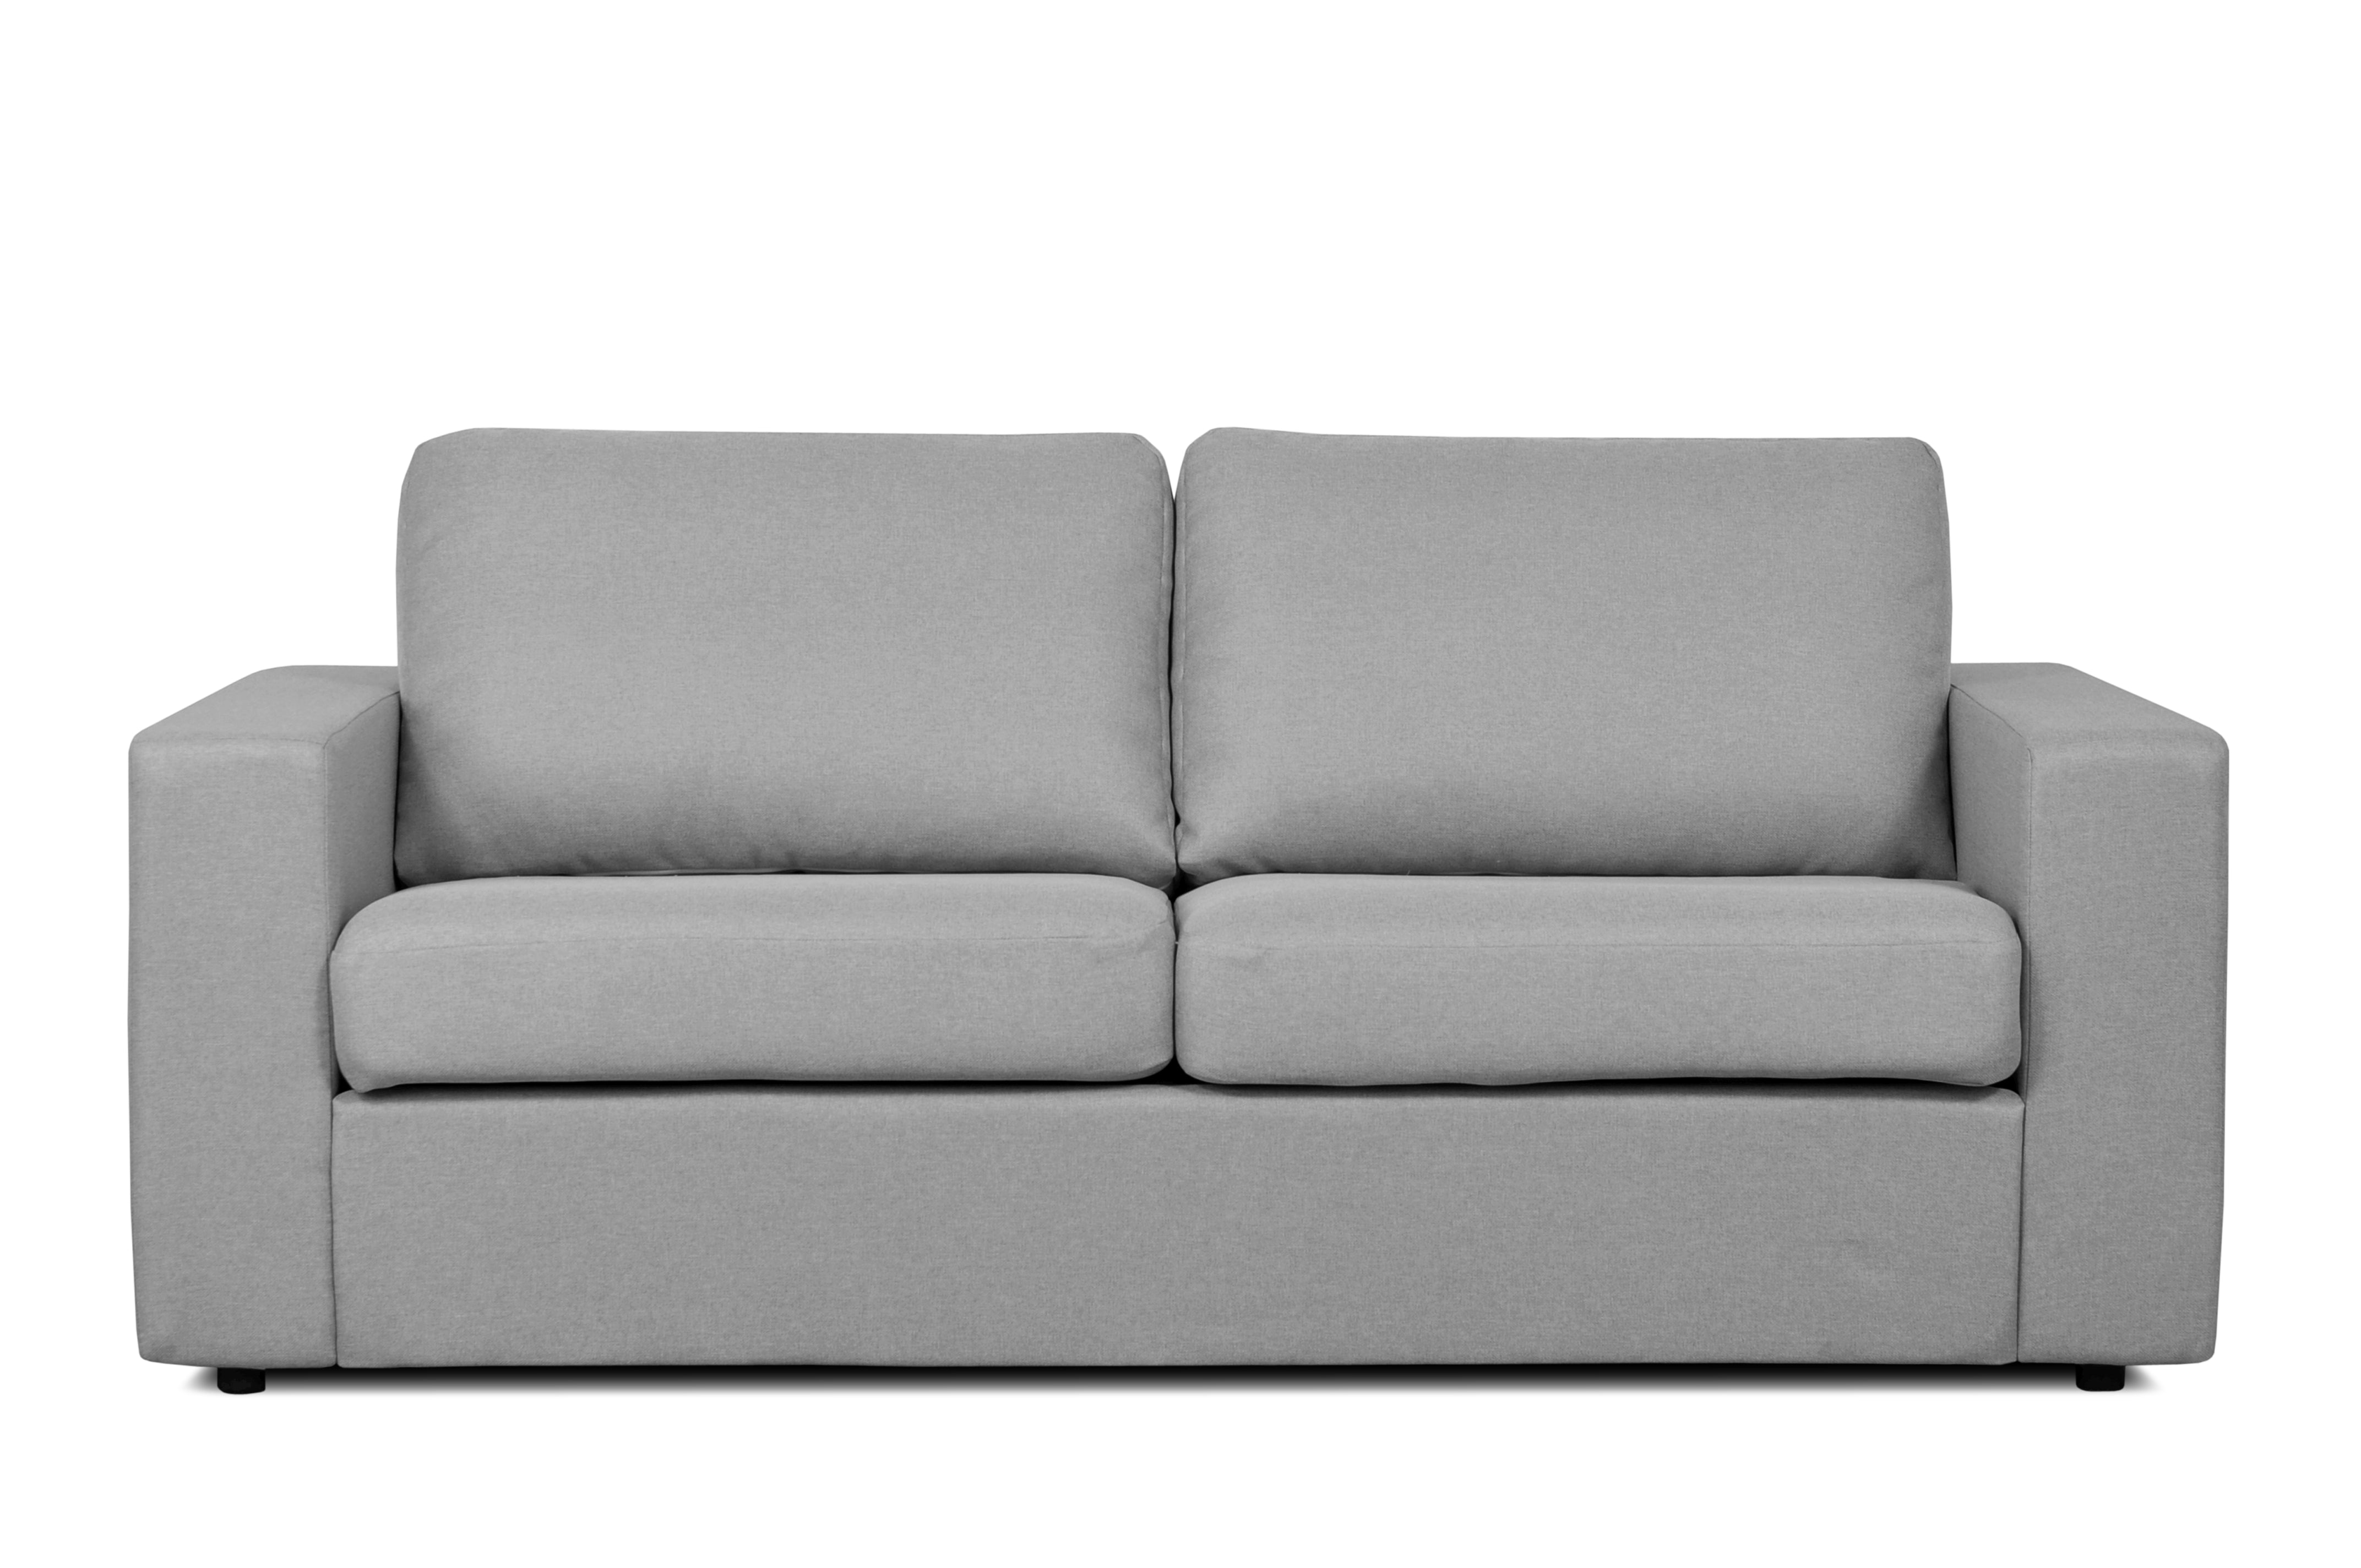 3 seater sofa upholstered in gray fabric, for living room, dining room, bedroom office - MARIO